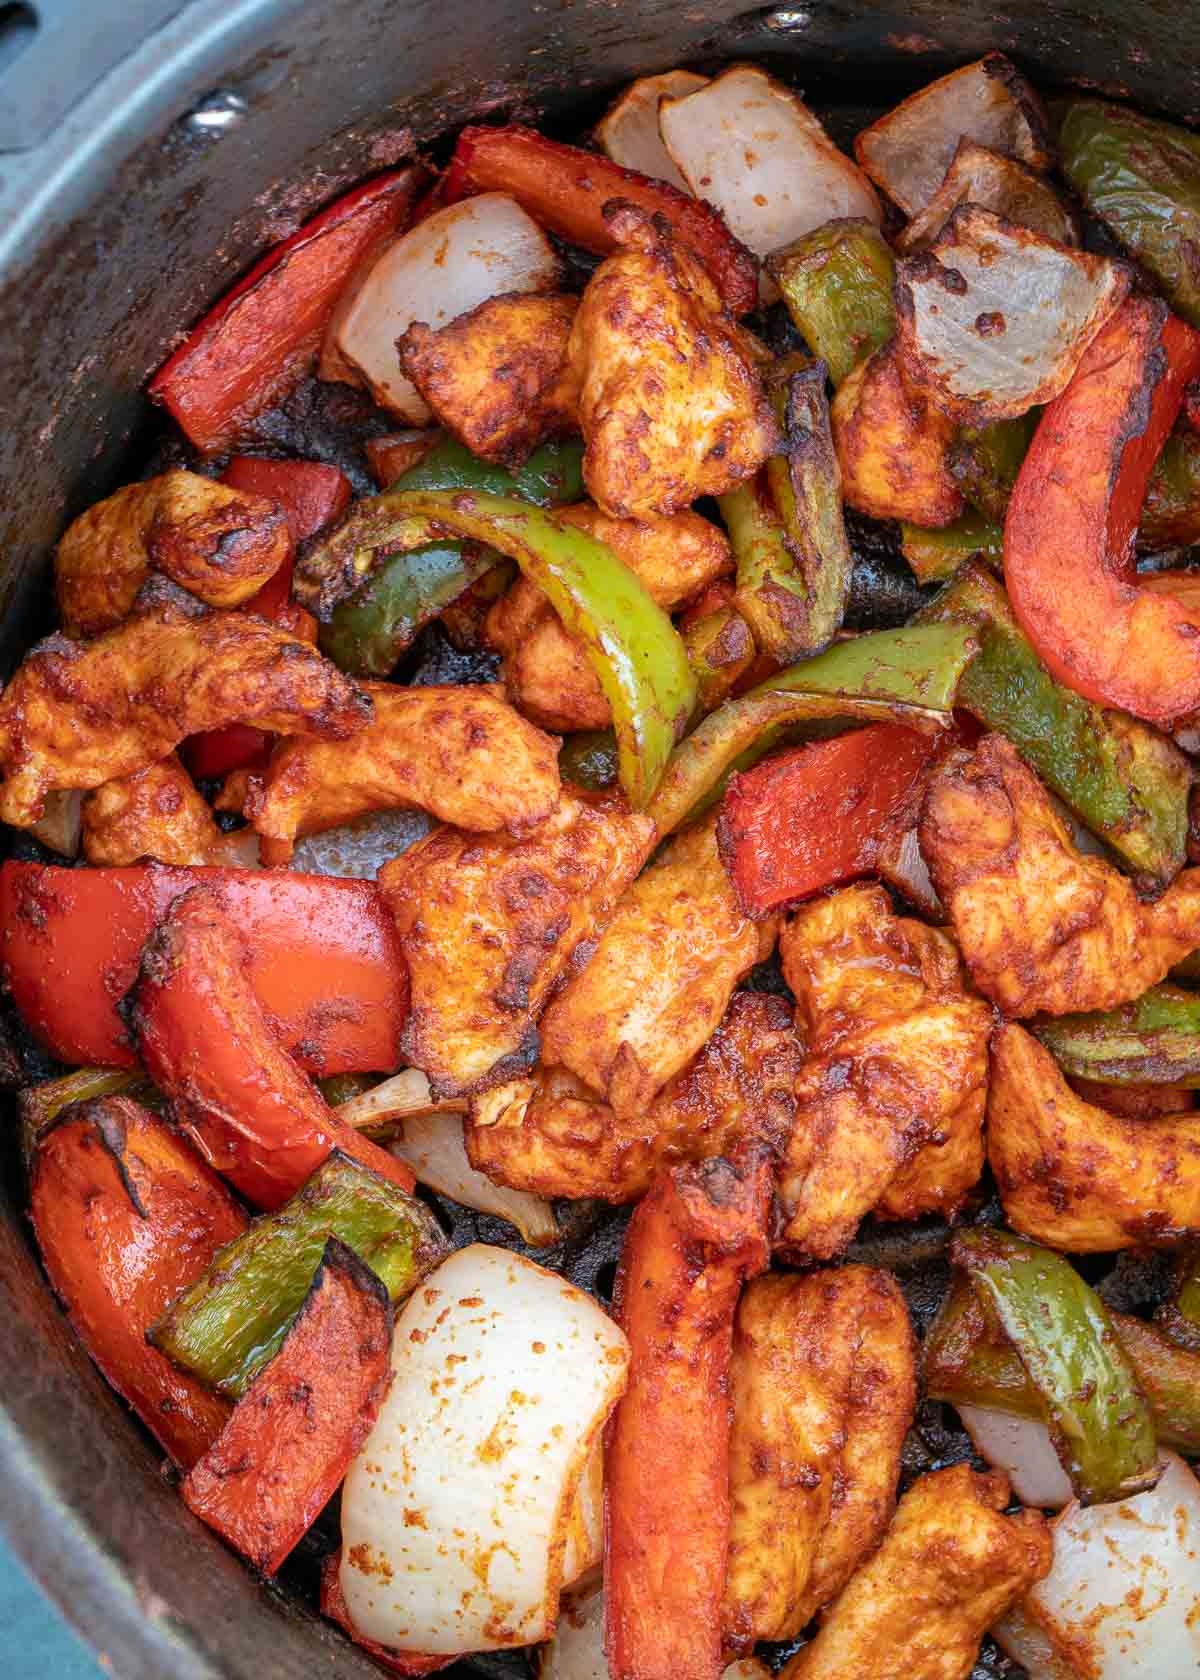 These Air Fryer Chicken Fajitas are ready in just 10 minutes! These flavorful fajitas feature juicy chicken and perfectly cooked peppers and onions!